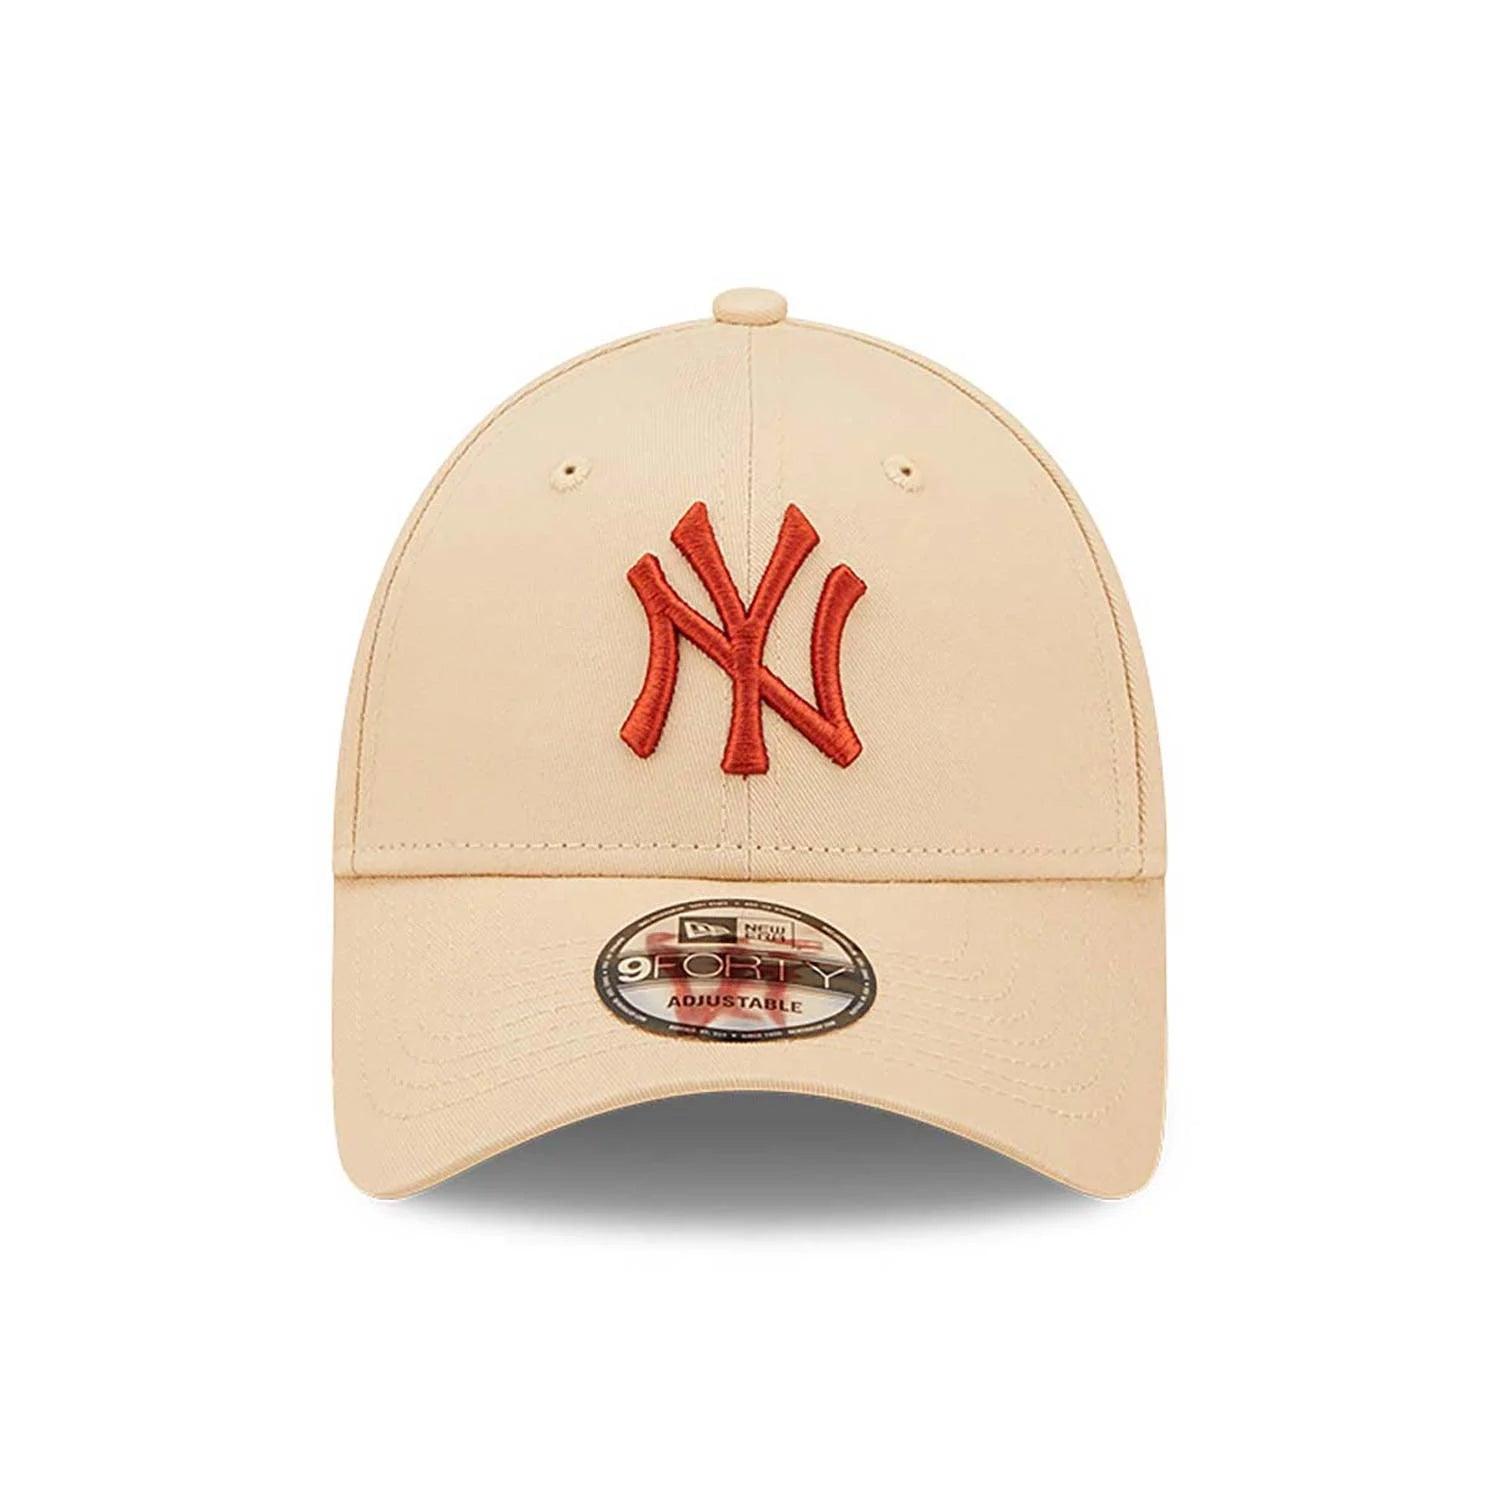 New Era - NY Yankees Faux Leather 9FORTY Curved Cap - Cream